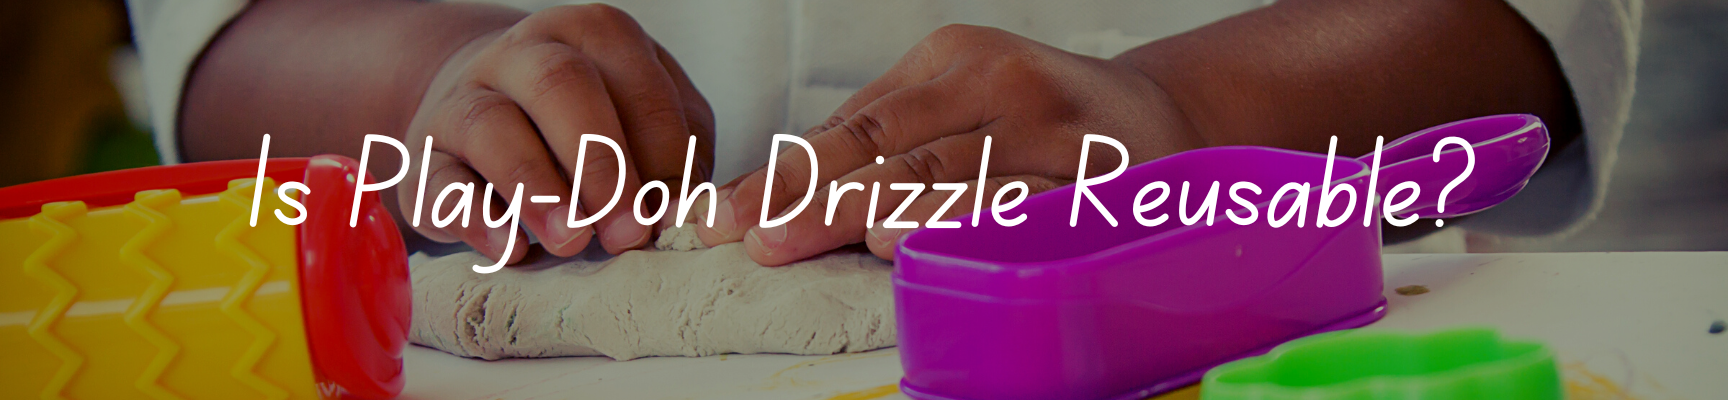 Is Play-Doh Drizzle Reusable